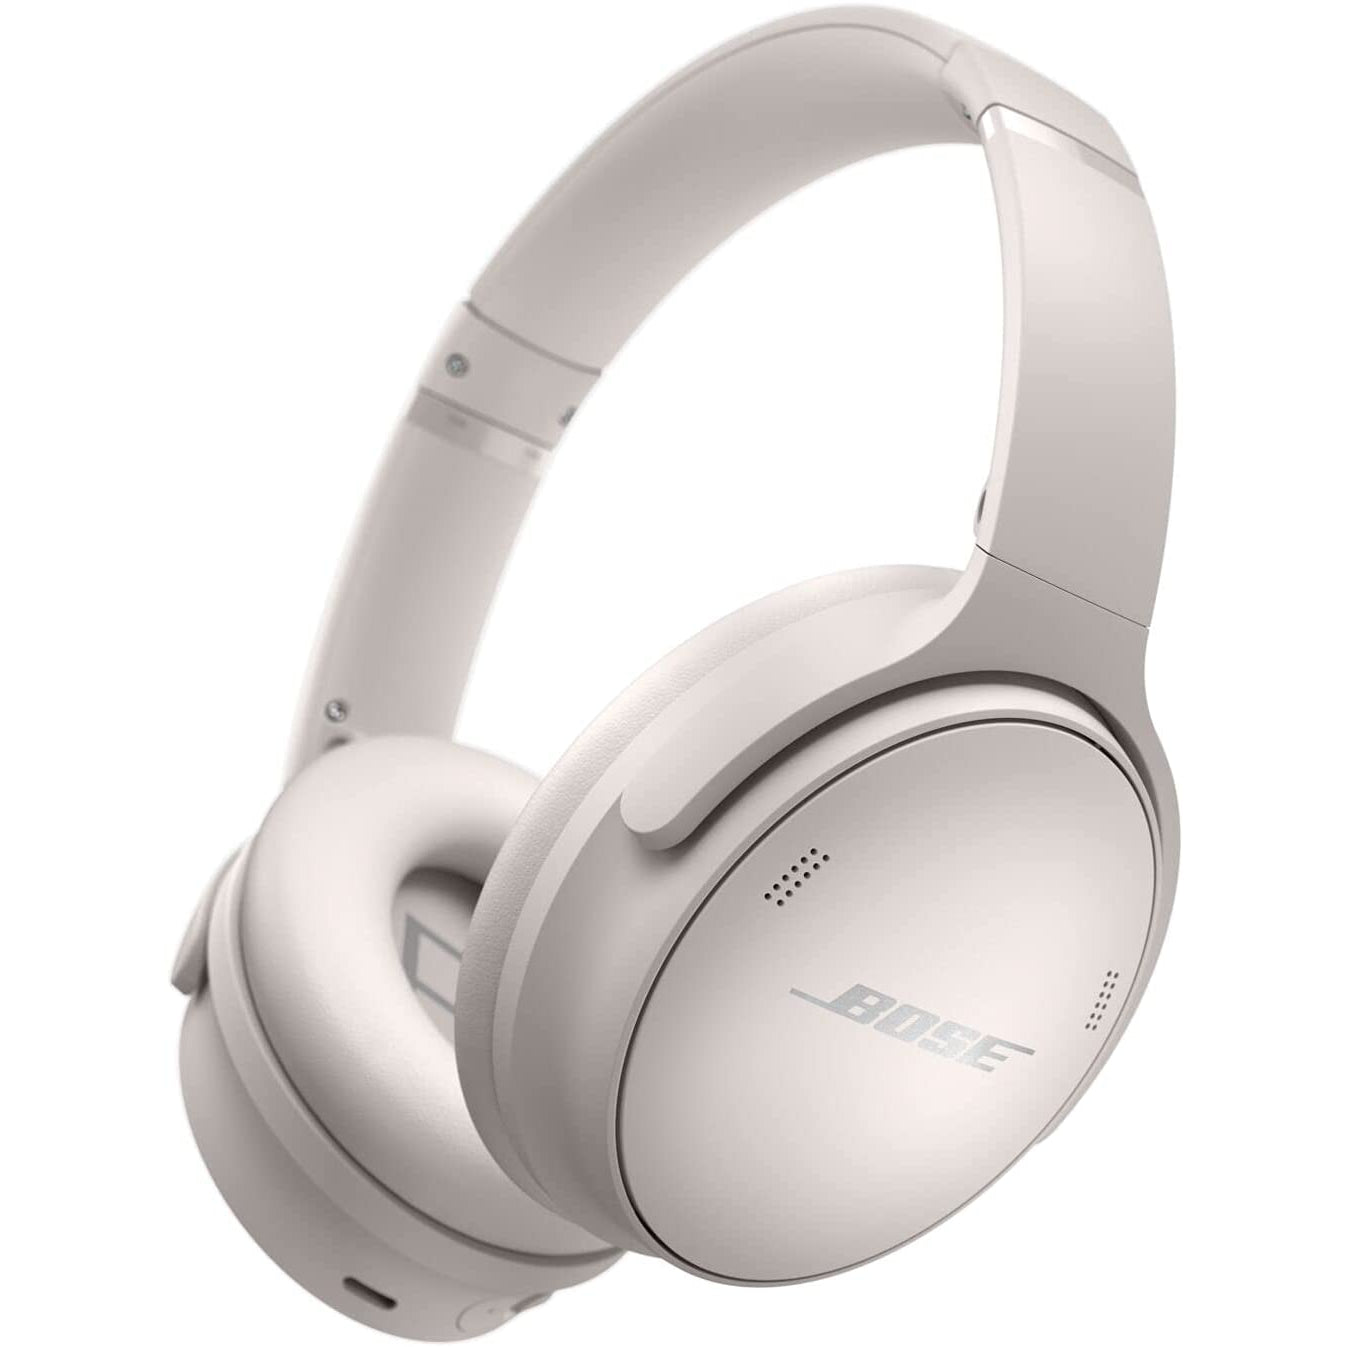 Bose Quiet Comfort 45 Bluetooth Wireless Noise Cancelling Headphones - White